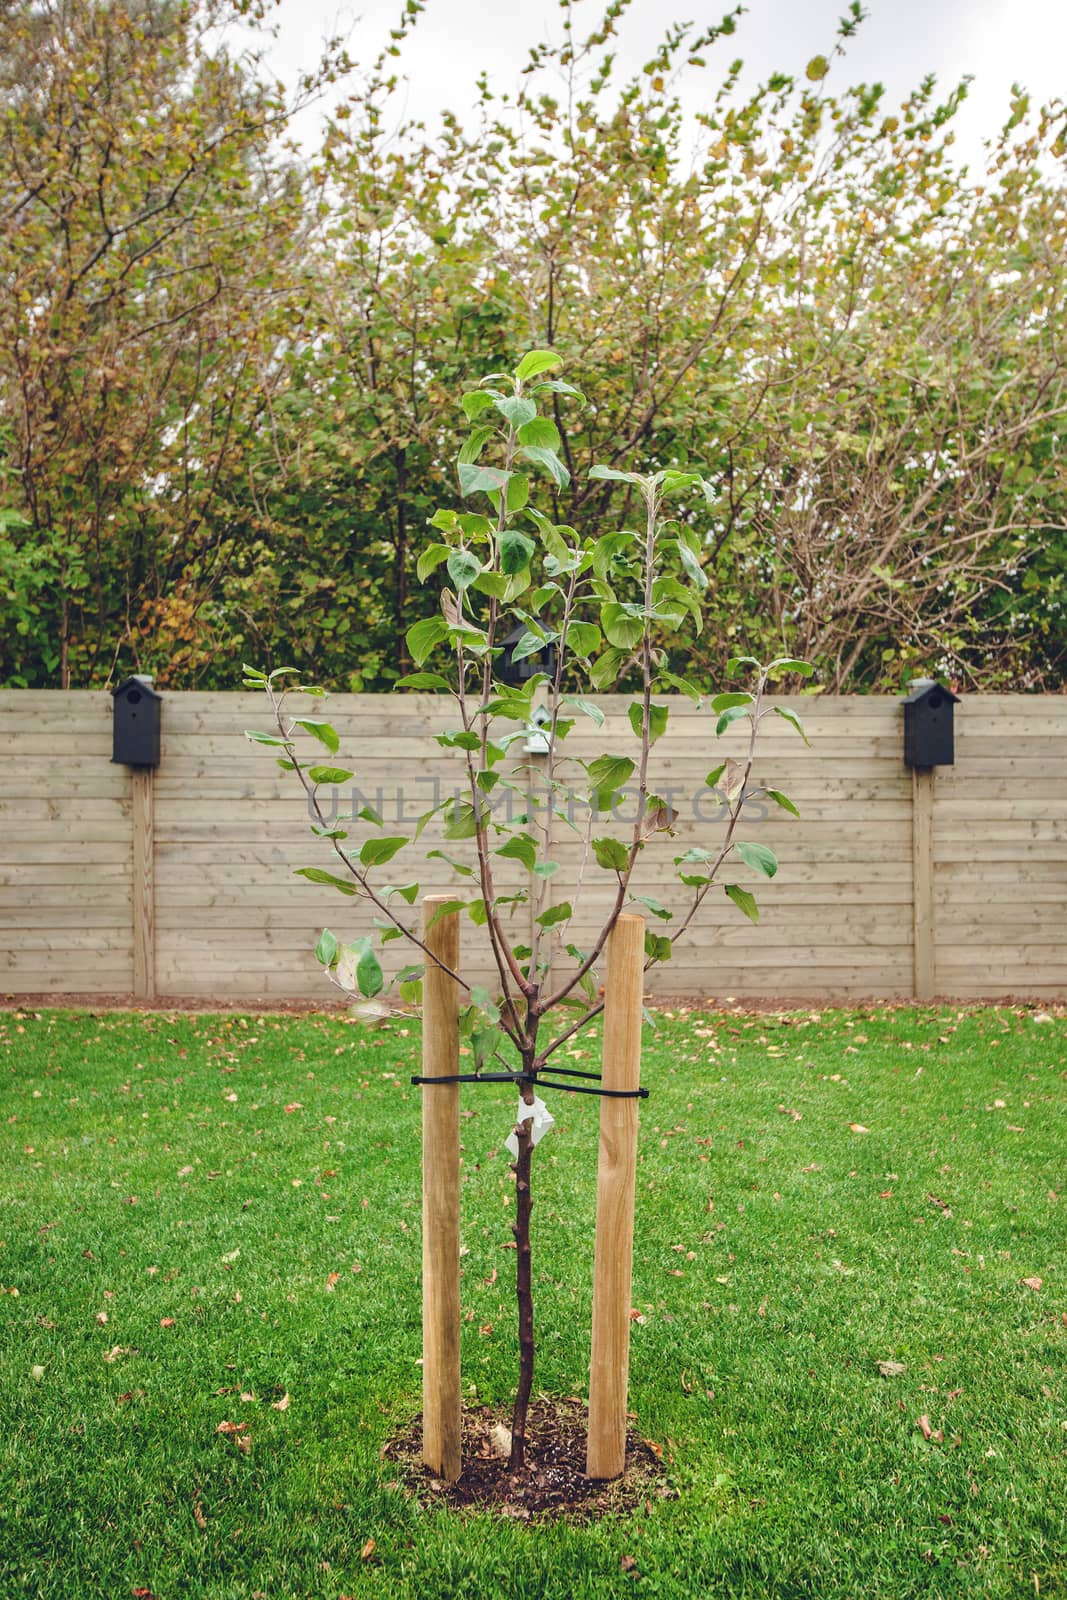 New planted apple tree in a garden by Sportactive